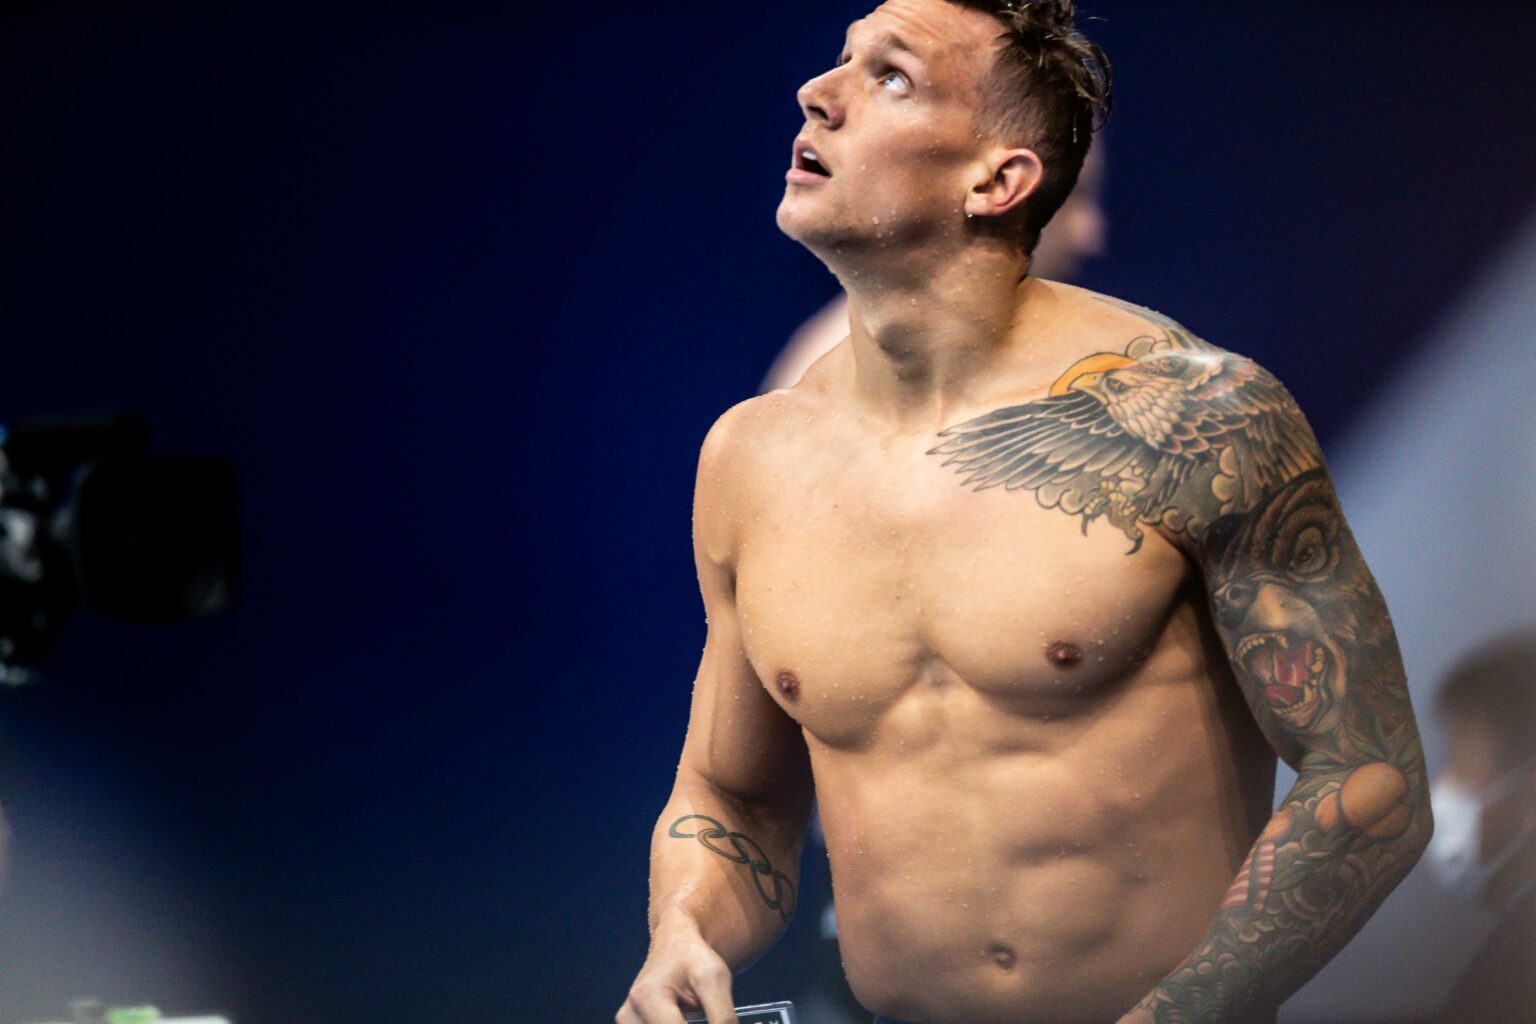 Caeleb Dressel on Comparisons to Phelps: "I don't think it ...